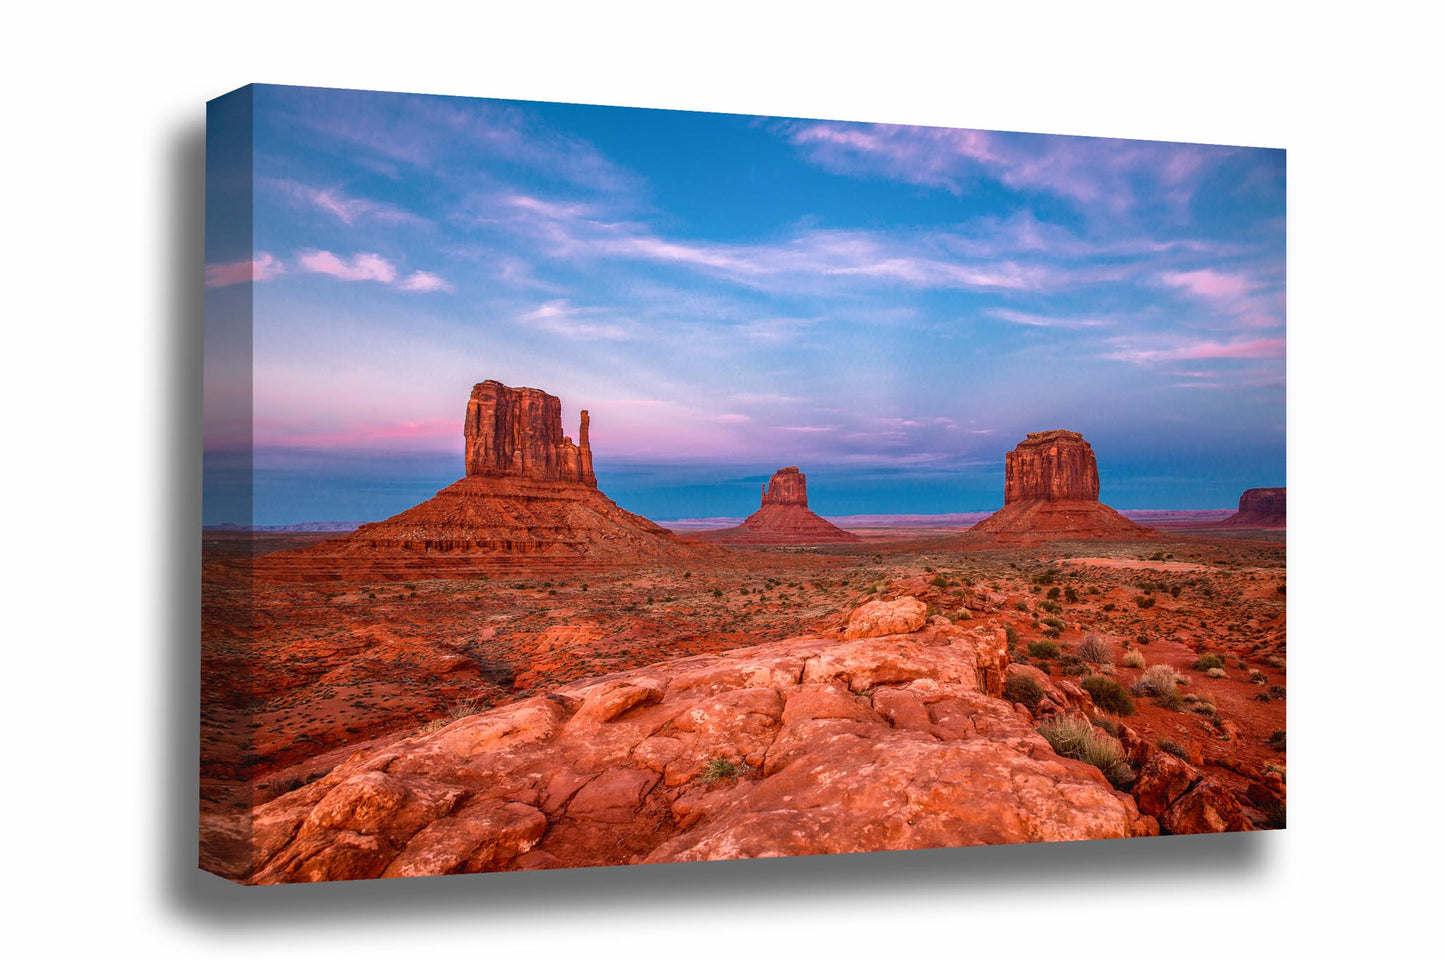 Western landscape canvas wall art of Monument Valley at sunset along the Arizona and Utah state line by Sean Ramsey of Southern Plains Photography.